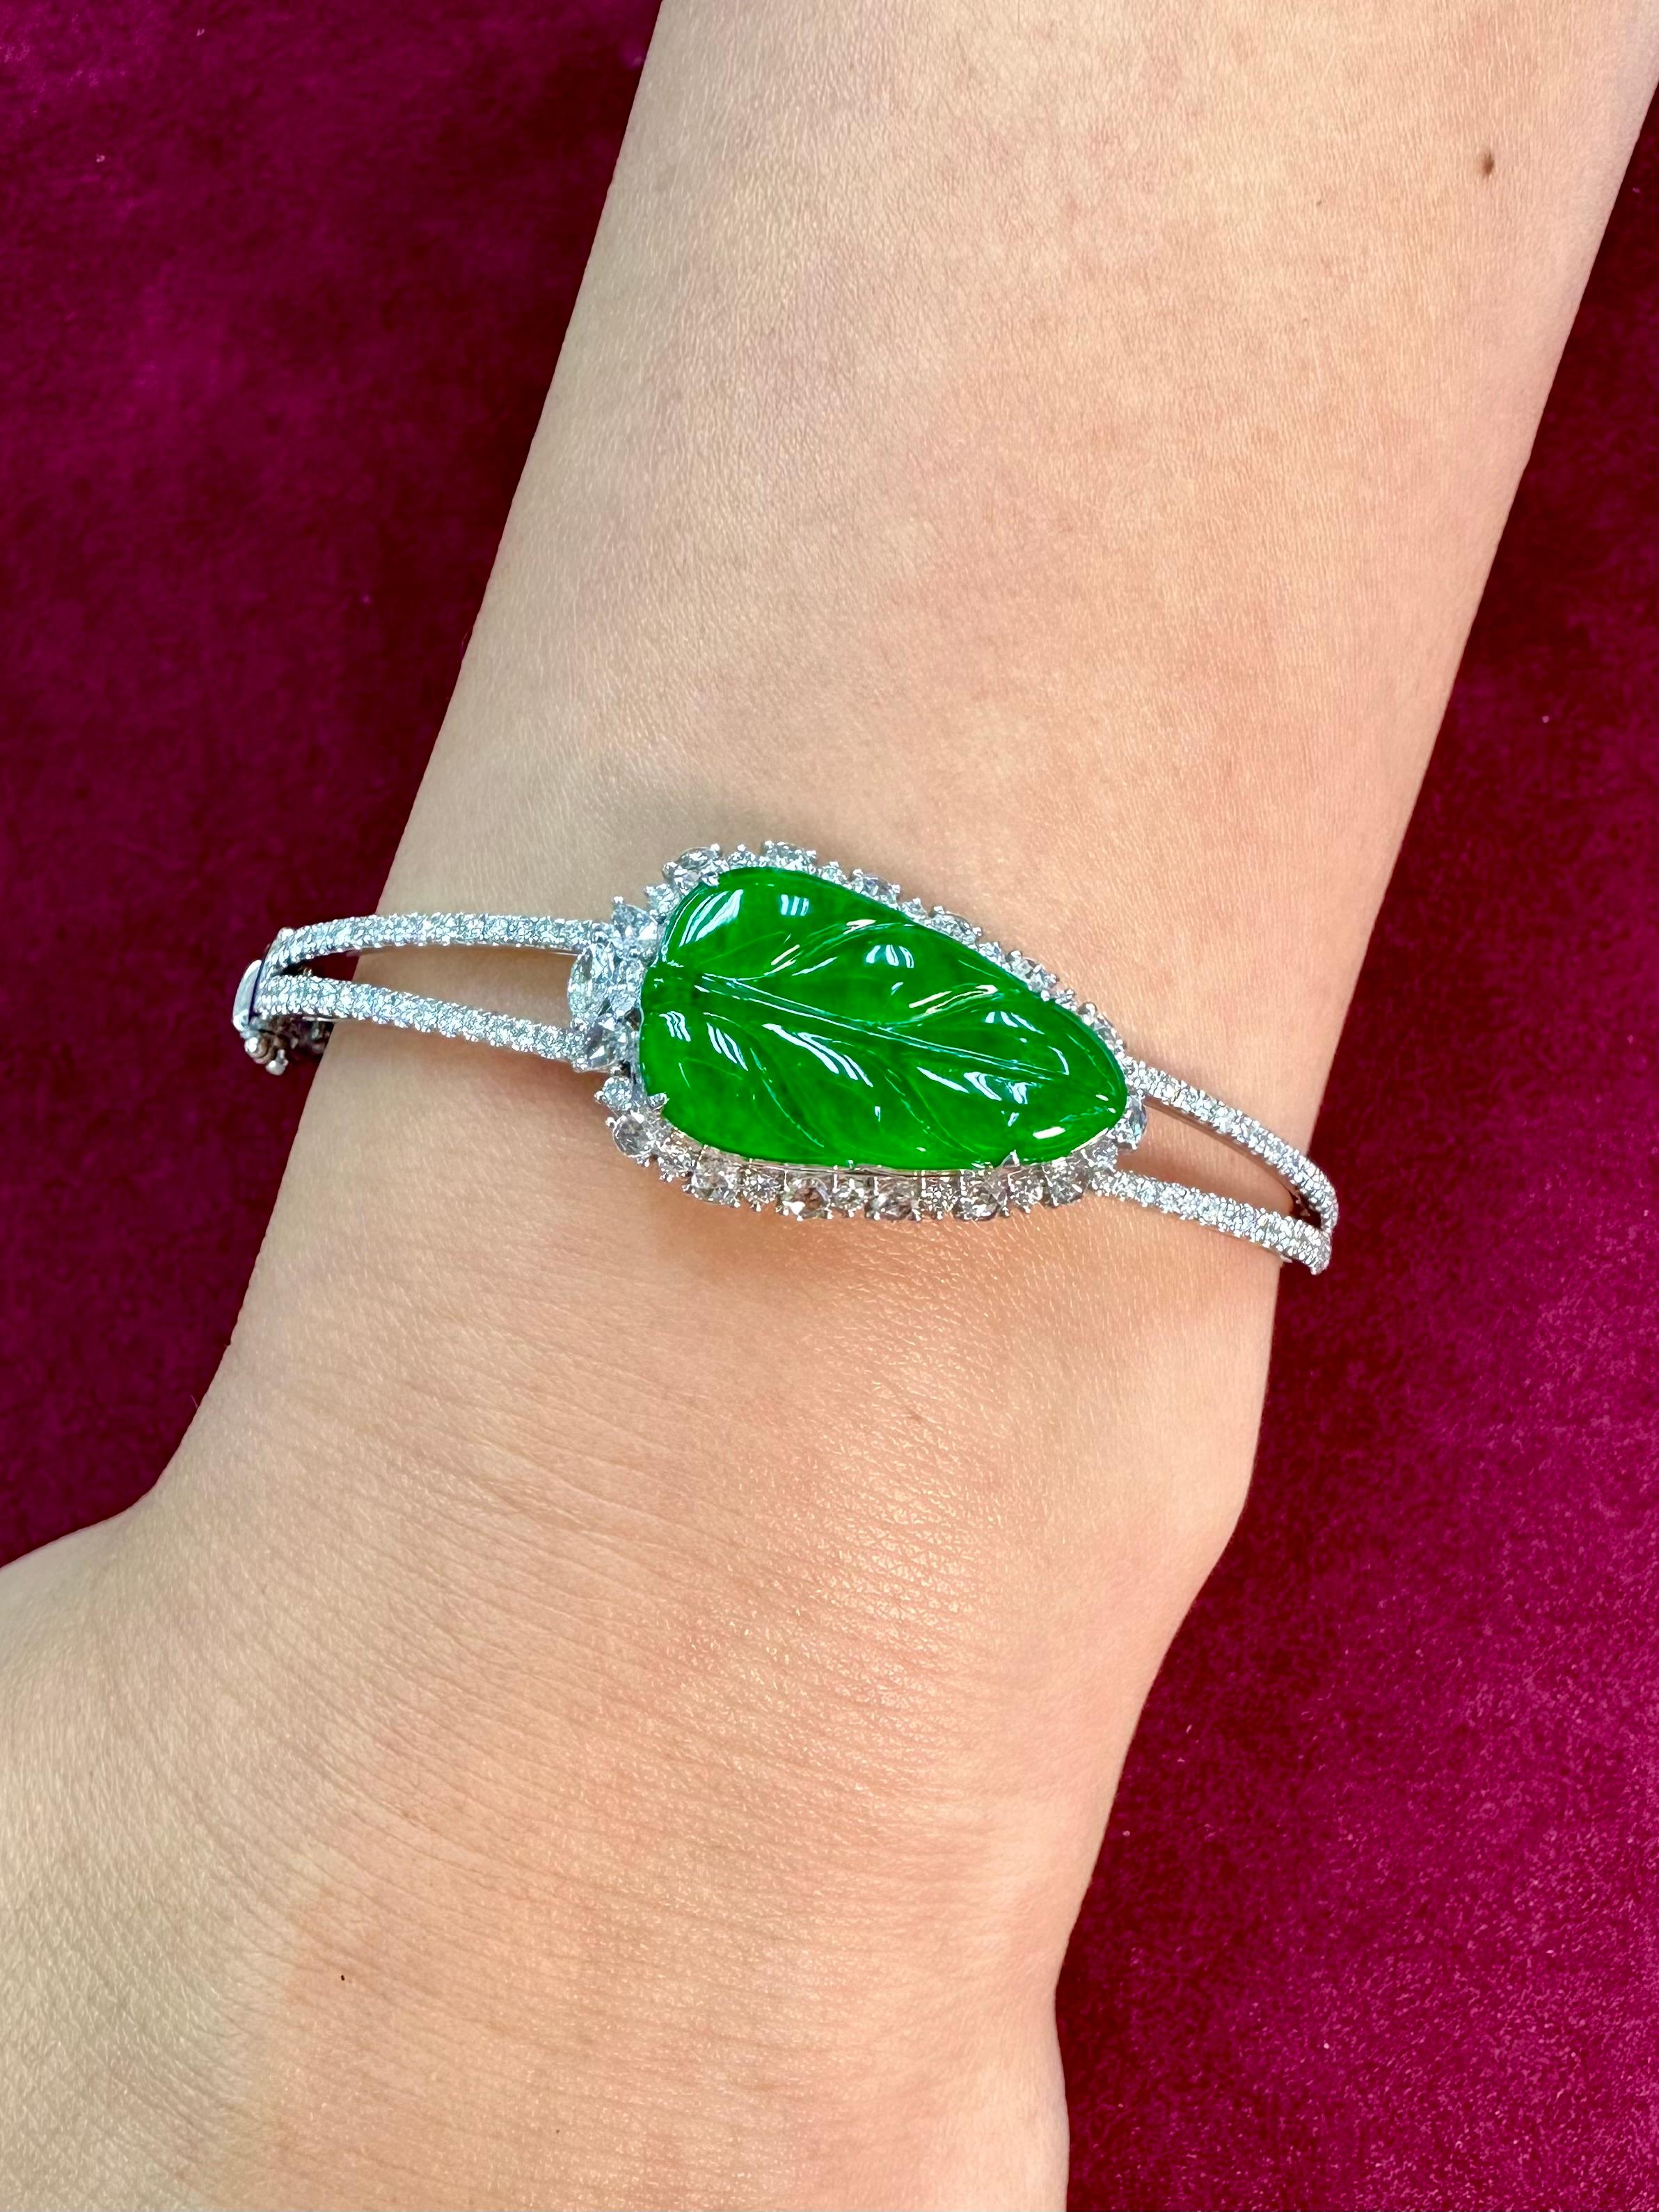 Please check out the HD video! This is certified by two labs to be natural jadeite jade. The bangle bracelet is set in 18k white gold. There is one large carved apple green jade leaf surrounded by 1.35cts of new rose cut and round brilliant white